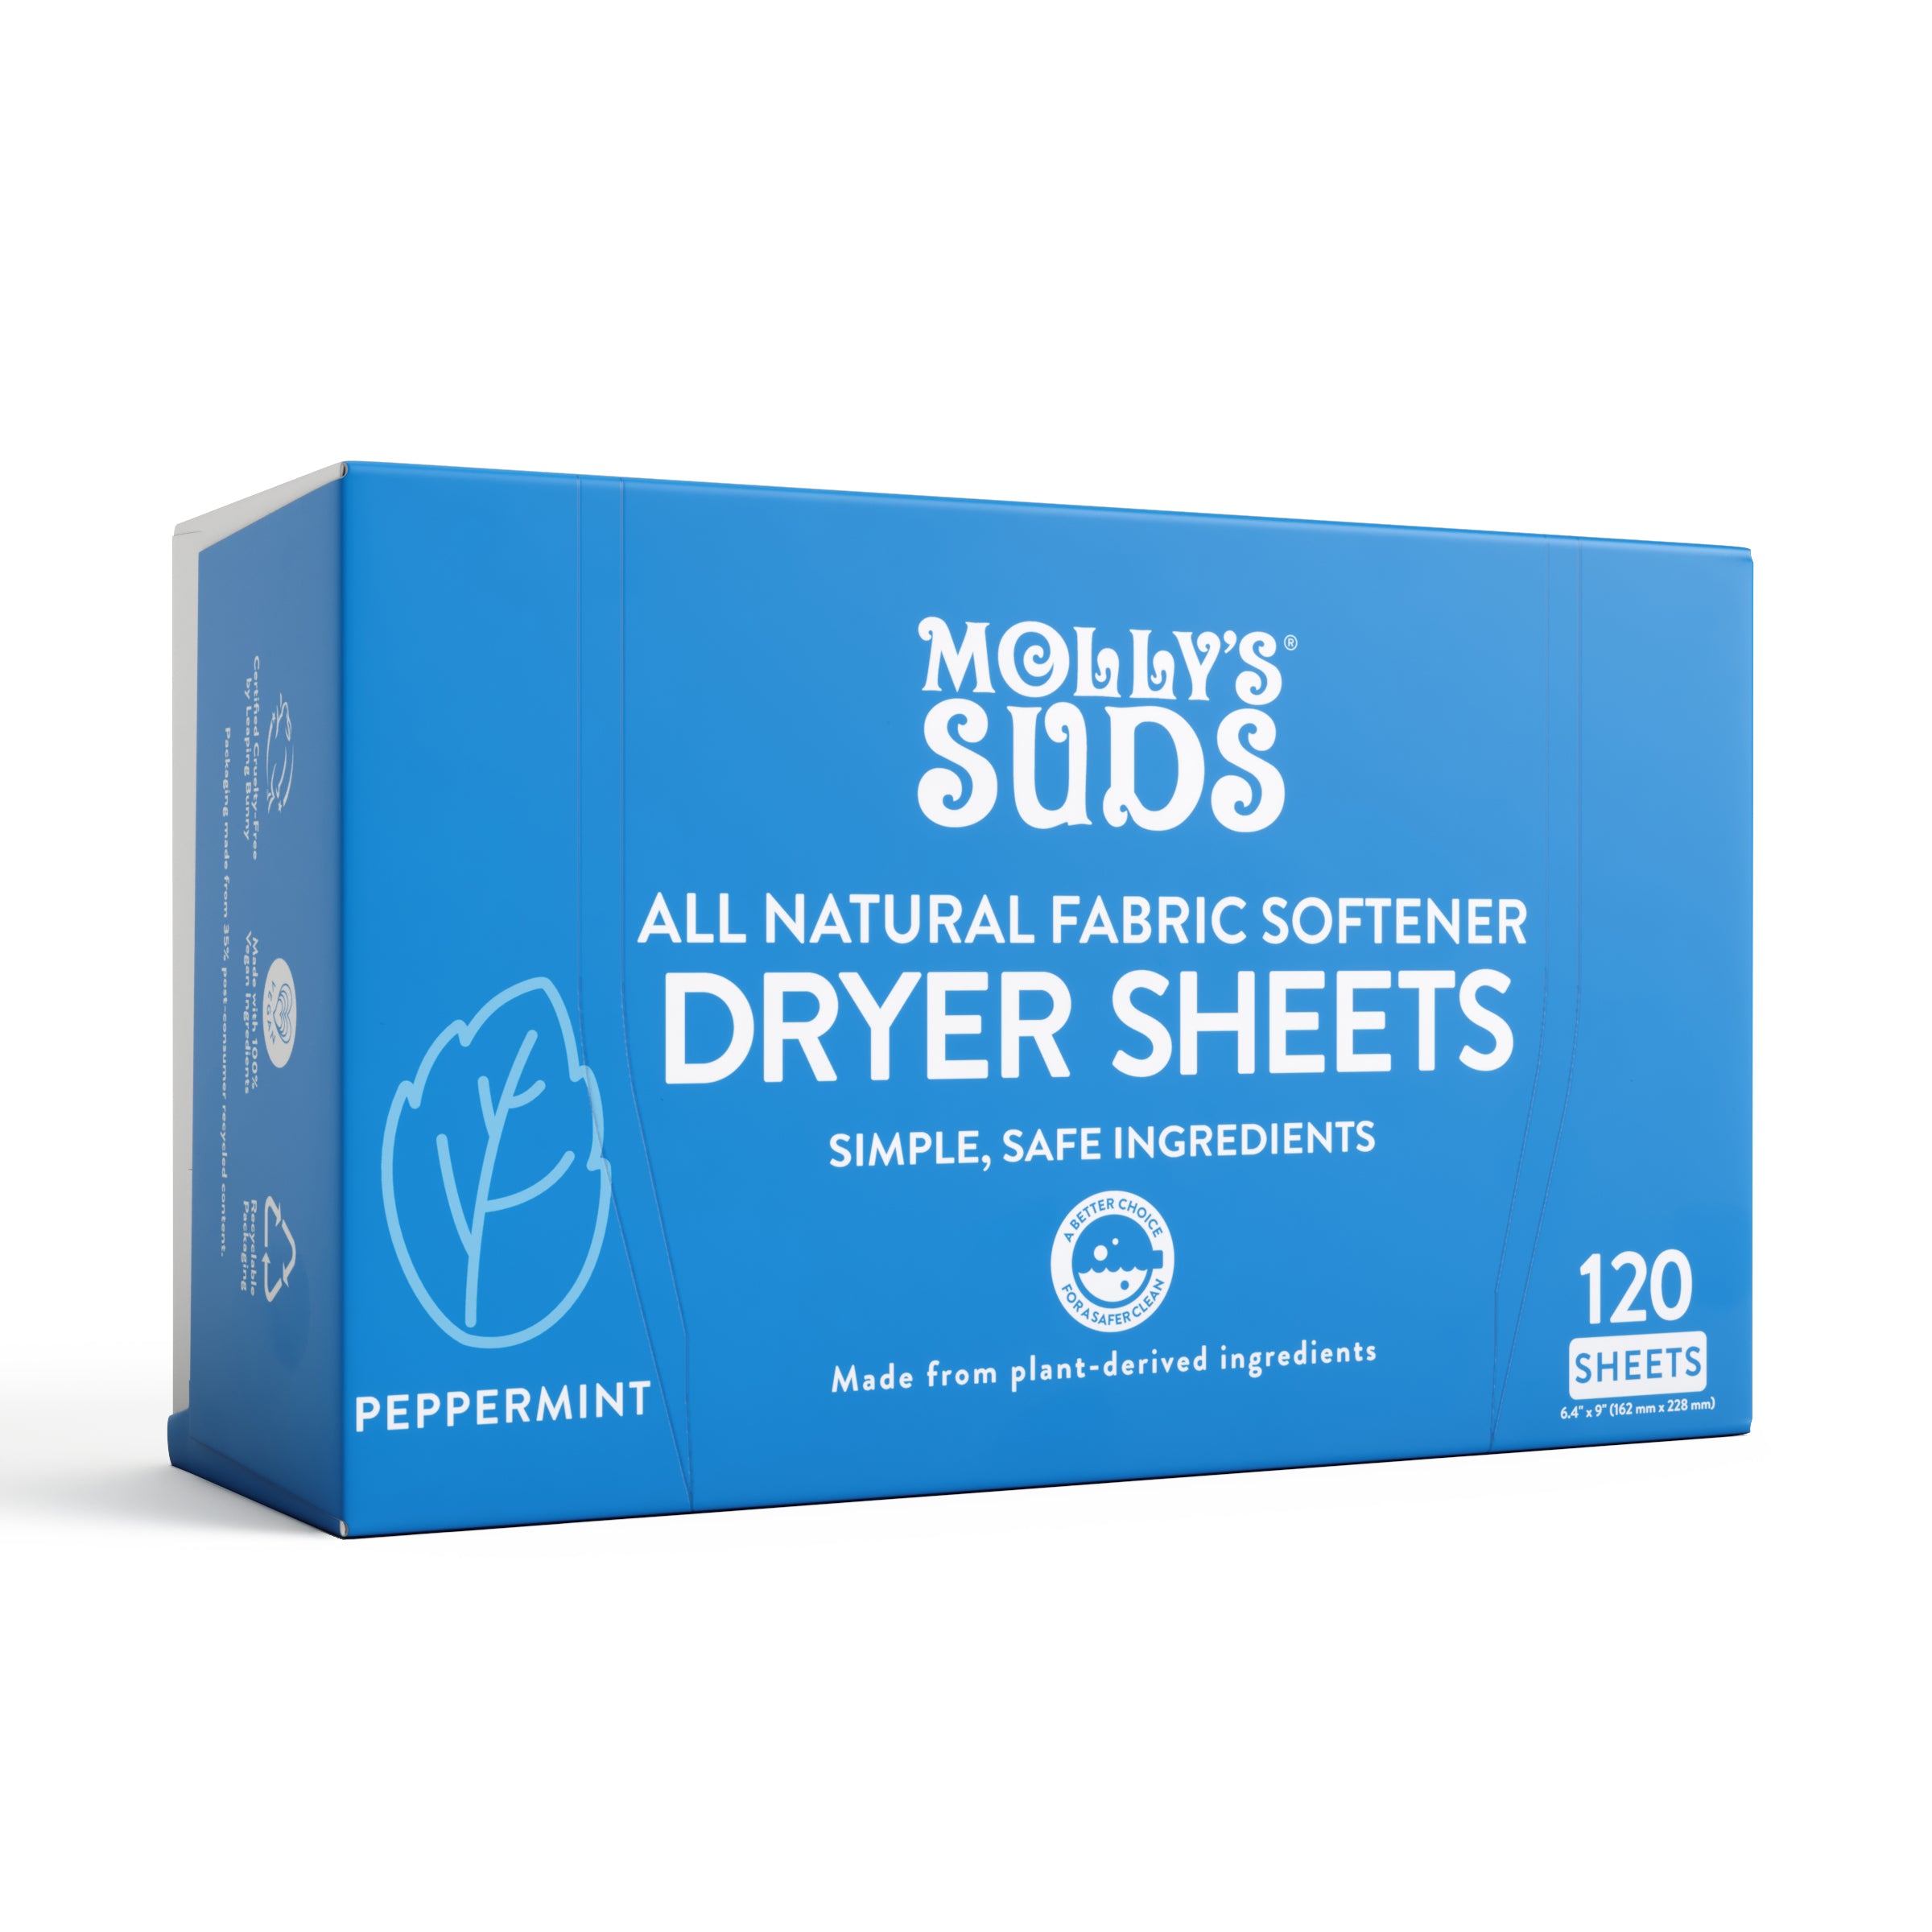 Molly's Suds Fabric Softener Dryer Sheets, Peppermint 120 Sheets